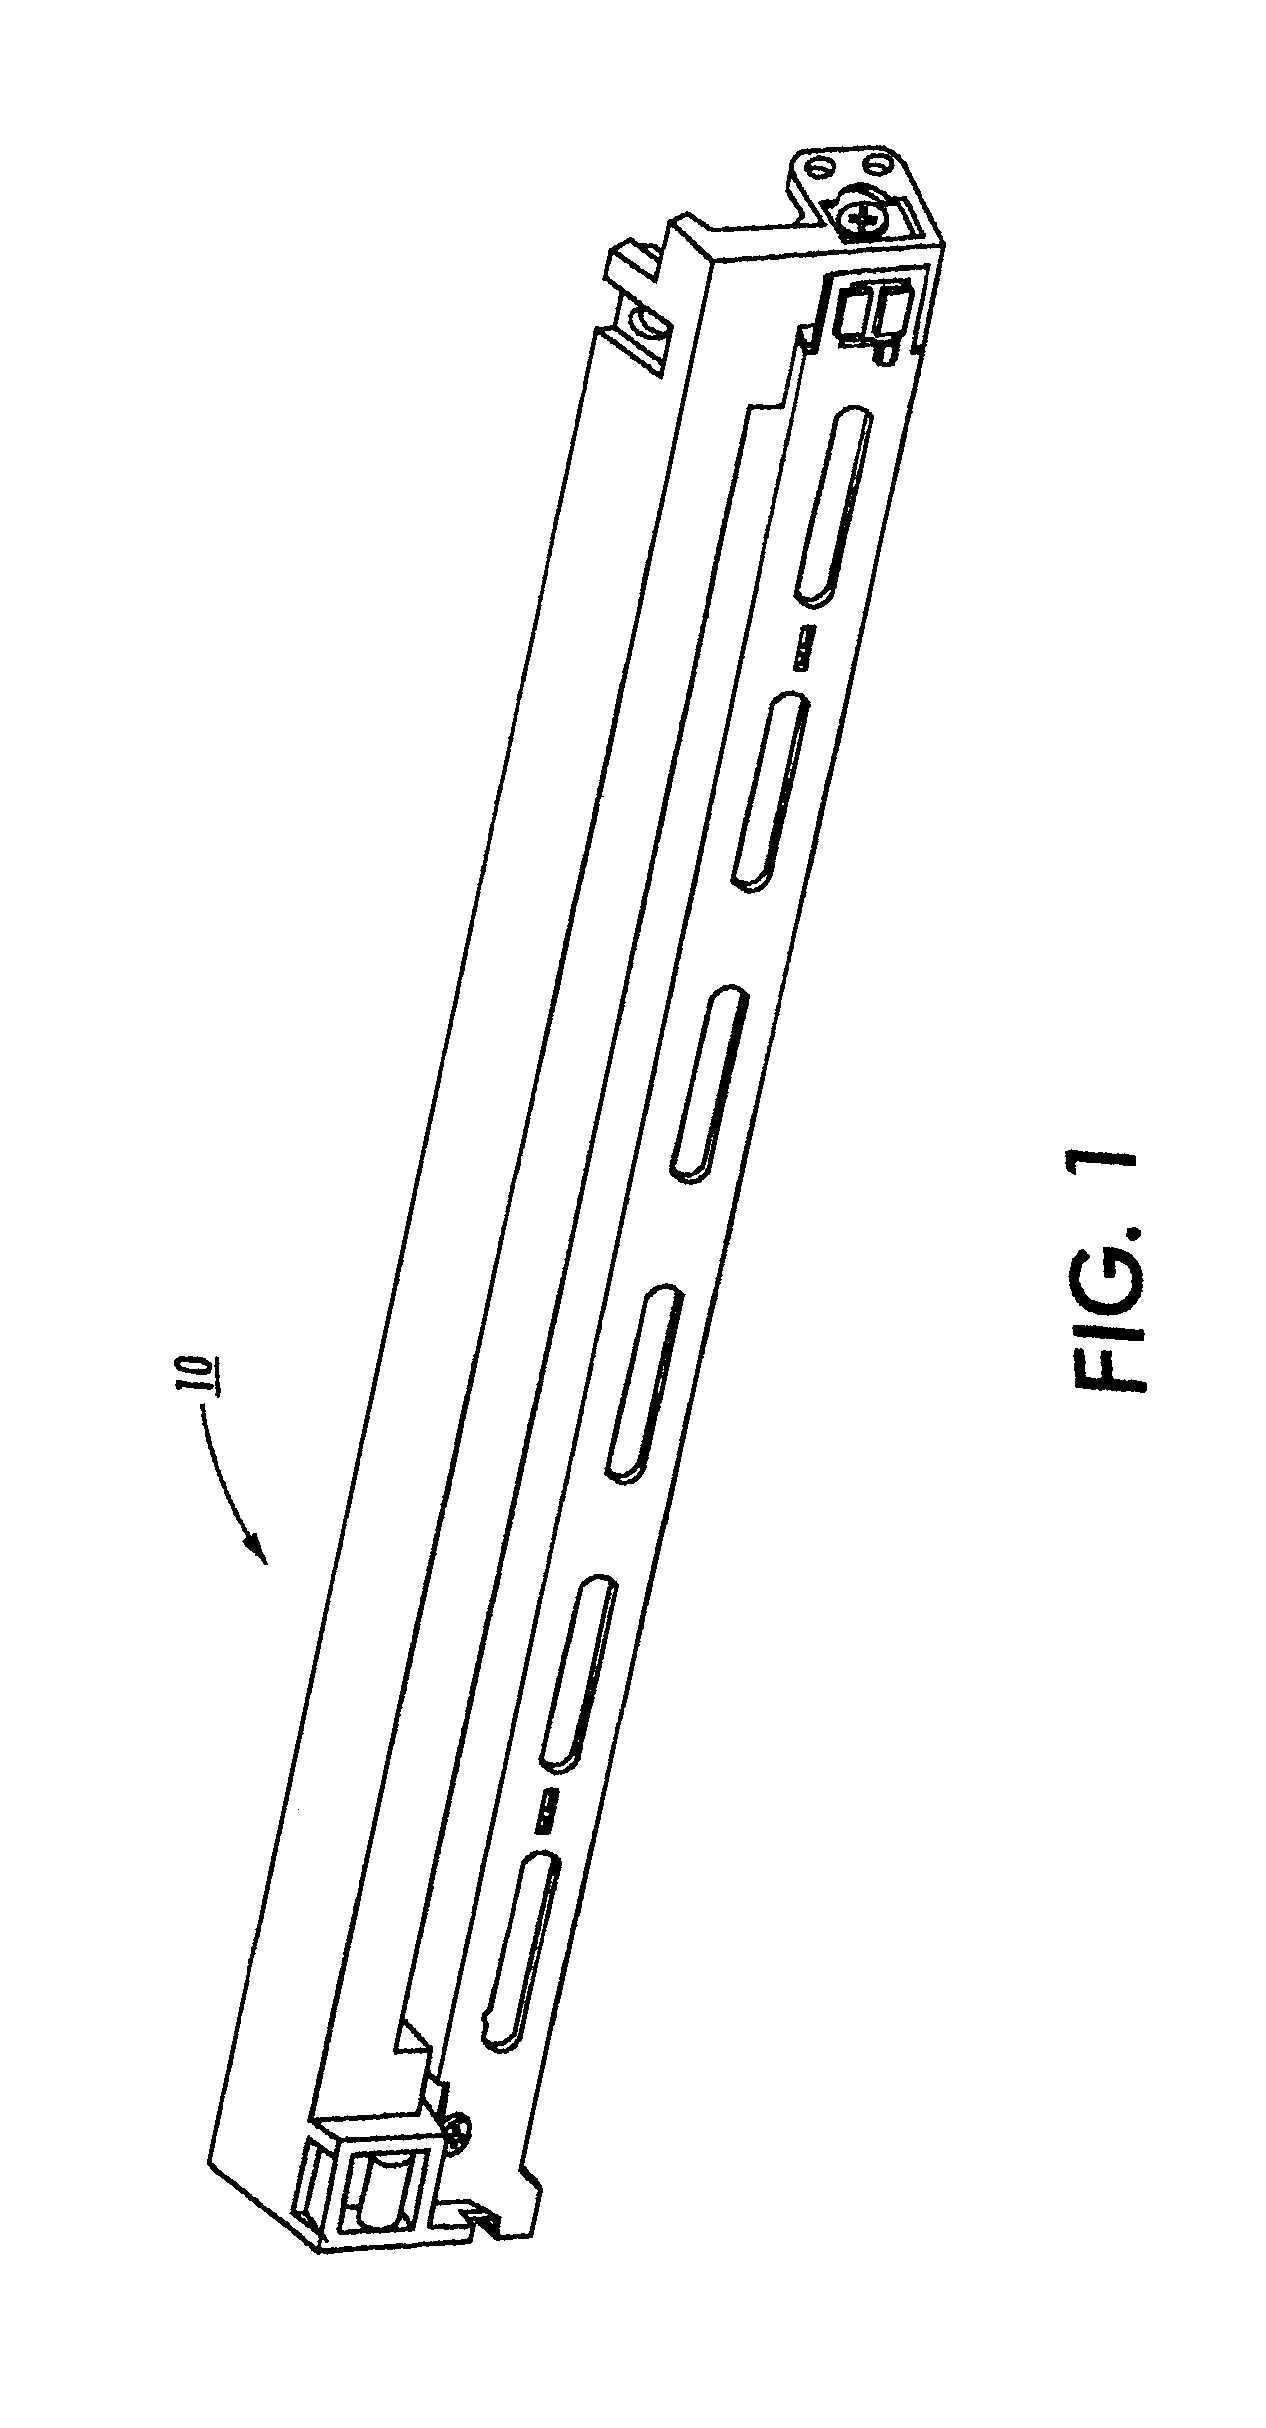 Uniform charge device with reduced edge effects